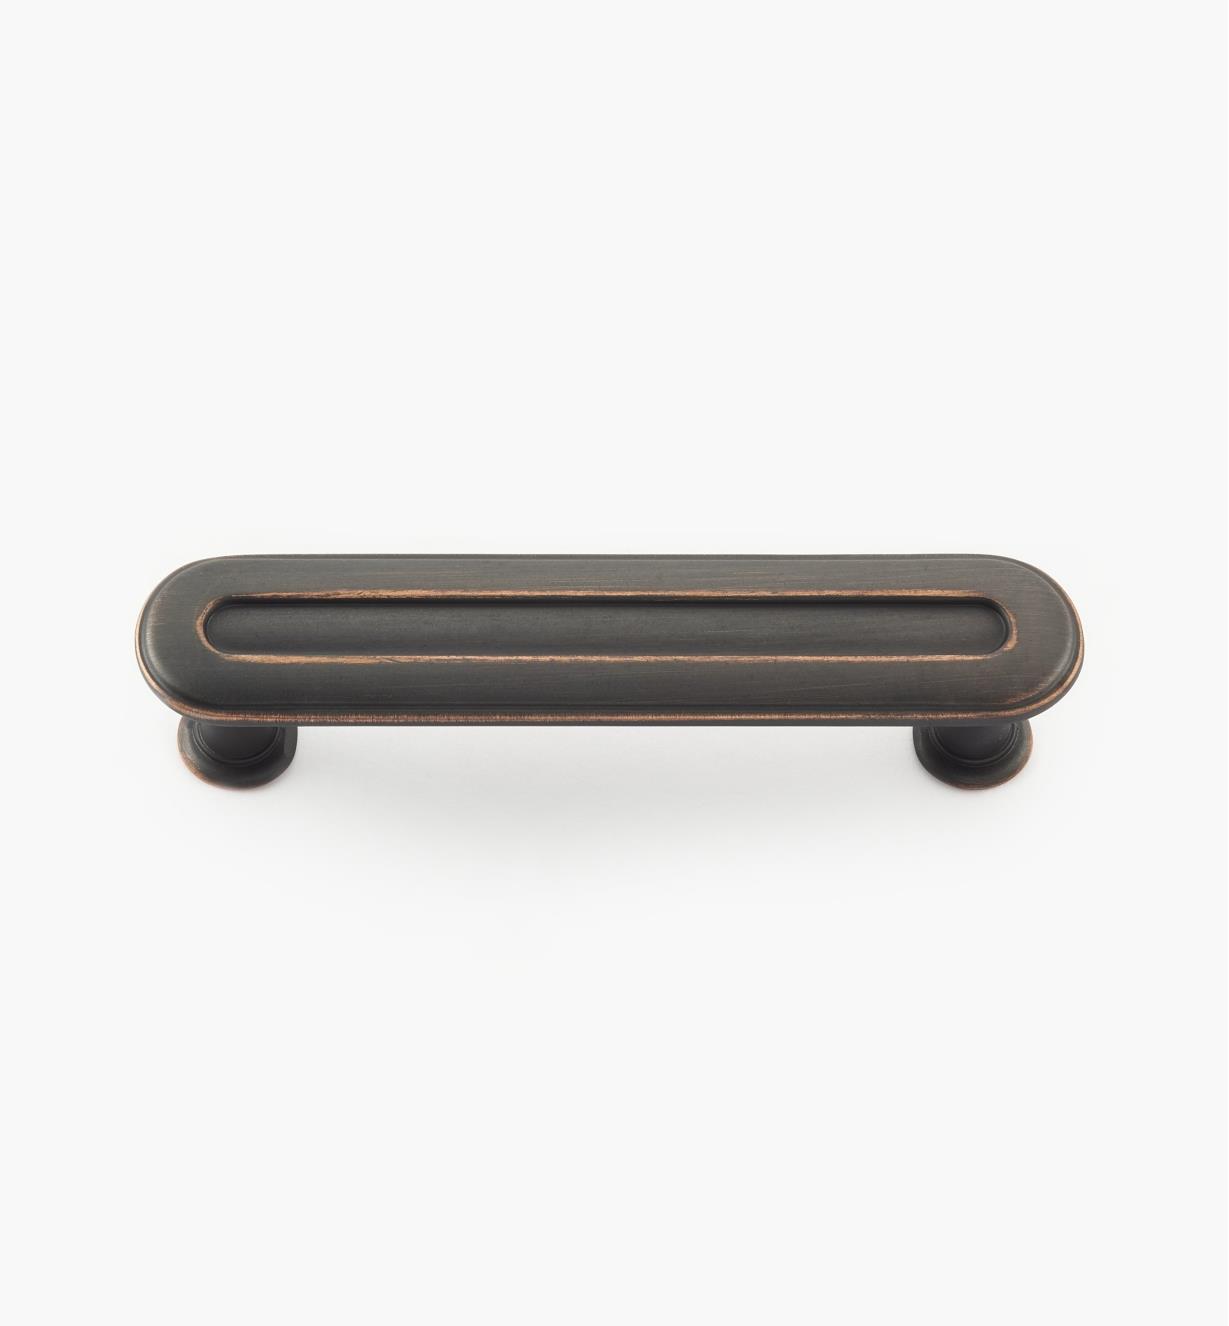 02A4342 - Porter Oil-Rubbed Bronze Oval Handle